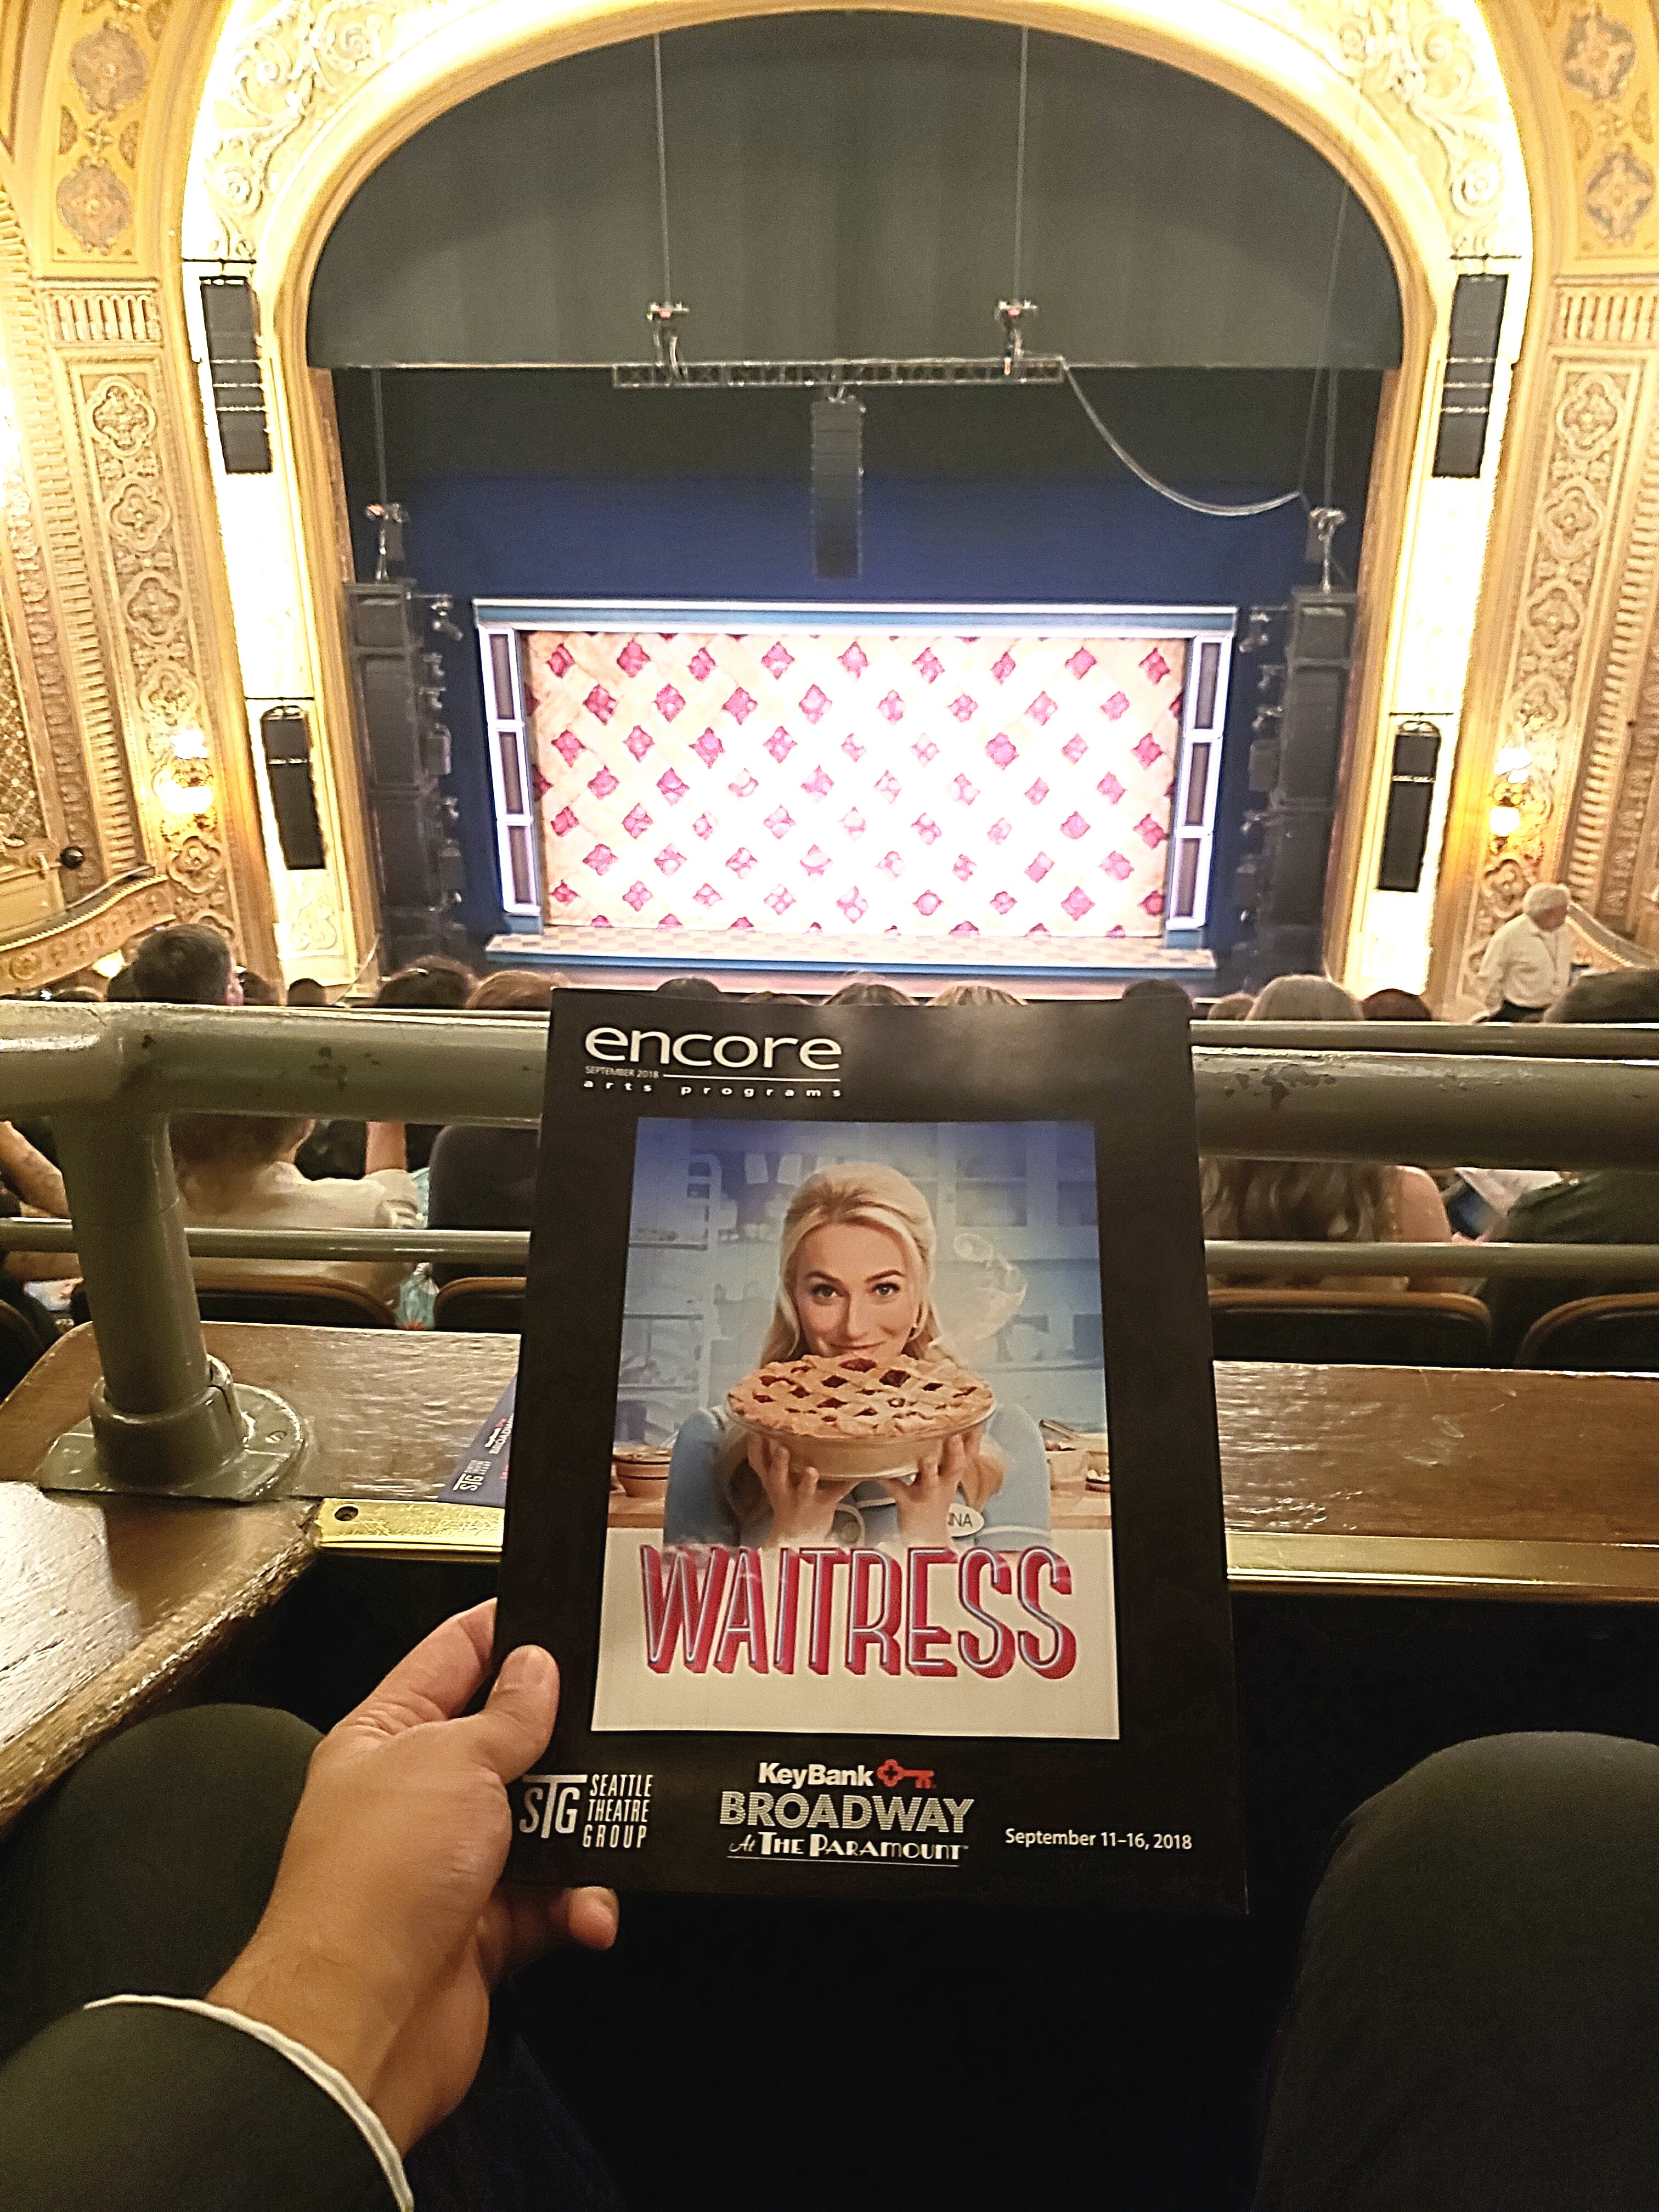 Watched Sara Barielles's Waitress the Musical, complete with 2 mini pies to eat during the descriptive, mouth-watering show. Wasn't sure where they were going with their stance on infidelity but found the ending acceptable.